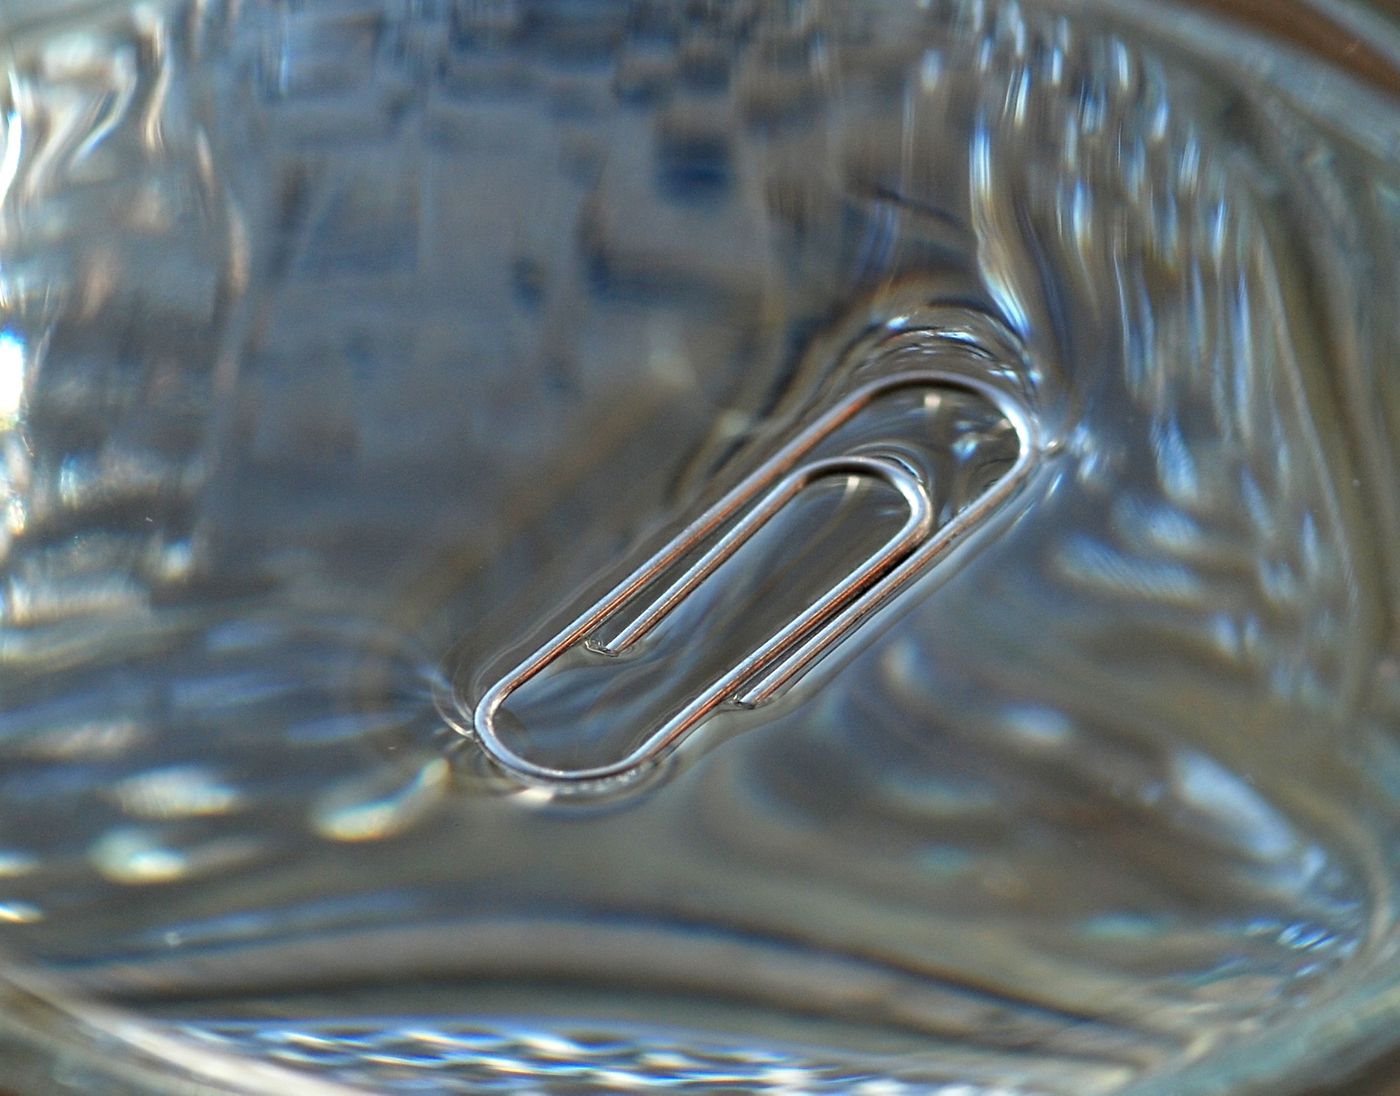 A paperclip floating on the surface of water using surface tension.